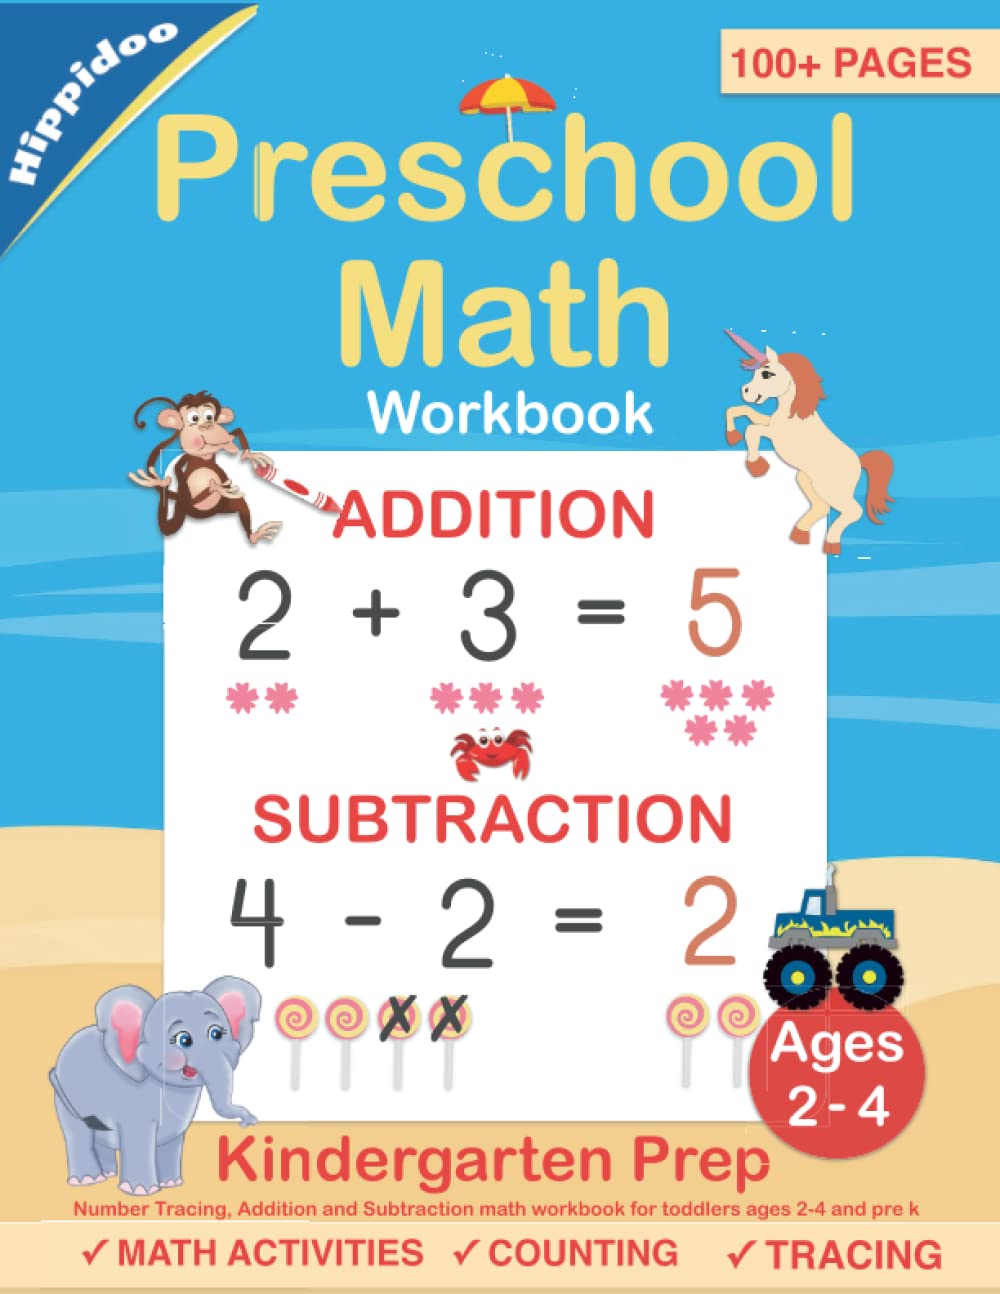 Preschool Math Workbook: Number Tracing, Addition and Subtraction math workbook for toddlers ages 2-4 and pre k (Learn Pen Control, Letters, Numbers, Sight Words & Math for Preschool & Kindergarten)